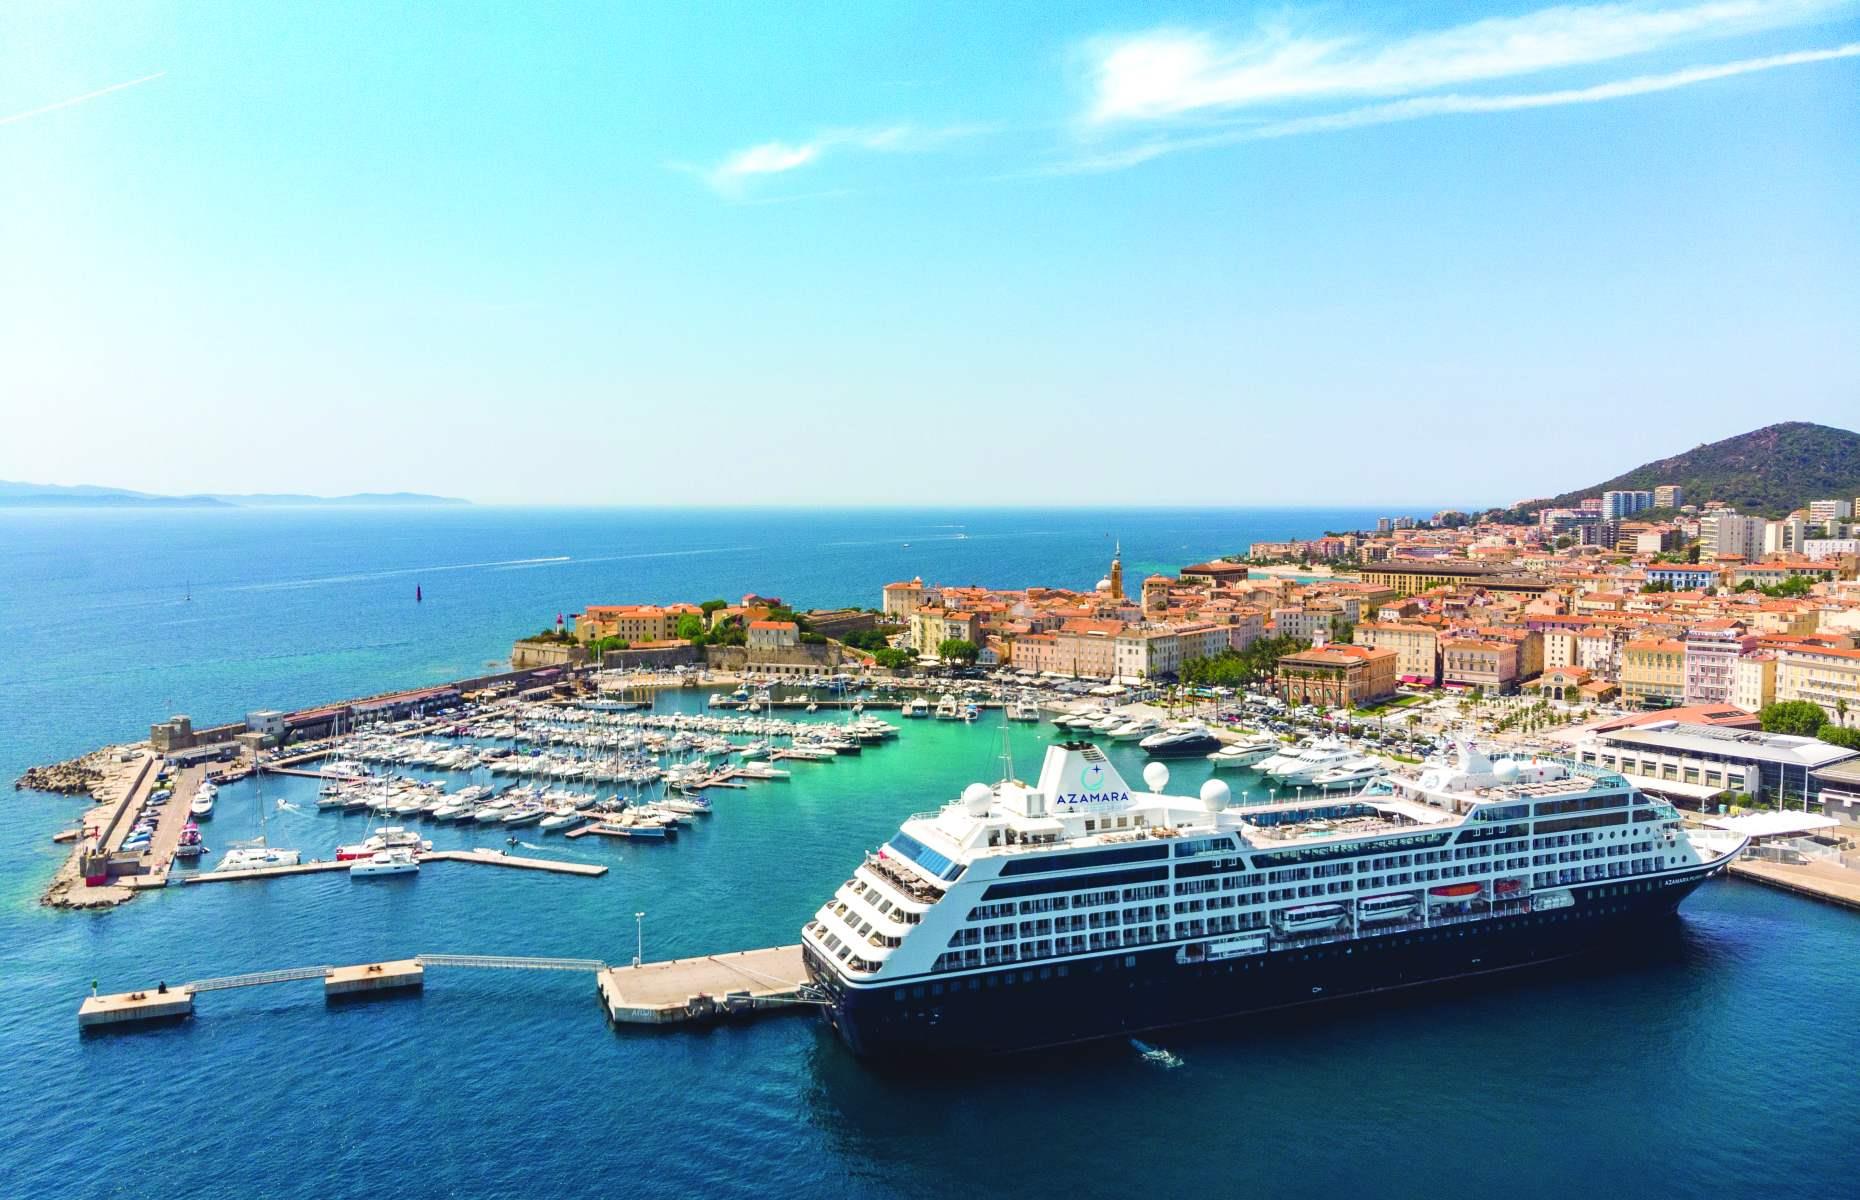 <p>If you’re planning on a bucket list-worthy sailing on one of the more luxurious ships, you’ll need to bag your spot early on. Take <a href="https://www.azamara.co.uk/?cid=aza_lead_b_bps_aim_goo_brandukhomepage_1102023_RSA&_aiid=14641&teng=go&beng=b&deng=c&keng=azamara%20cruise&meng=p&peng=&ieng=144707013083&kieng=kwd-4302615276&cieng=644377036482&cpieng=19539984873&feng=&cleng=CjwKCAiAzp6eBhByEiwA_gGq5CCdc3x4MsVRS4UsixbLvRgN6rvTlkDVWGSH47Vp0rlChE77cRaIBRoC_lsQAvD_BwE&utm_source=google&utm_medium=cpc&utm_campaign=Azamara-UK-Search-Brand">Azamara’s World Voyage</a>, a 155-night, 37-country sailing which takes place in 2024 and is currently sold out (there’s a waiting list of passengers hoping for cancellations). Luckily, spots on the 2025 World Voyage are still available – if you’ve got a minimum of $42,622 to spare.</p>  <p><a href="https://www.loveexploring.com/galleries/133059/the-worlds-most-beautiful-ports-visited-by-cruise-ships?page=1"><strong>The world's most beautiful ports visited by cruise ships</strong></a></p>